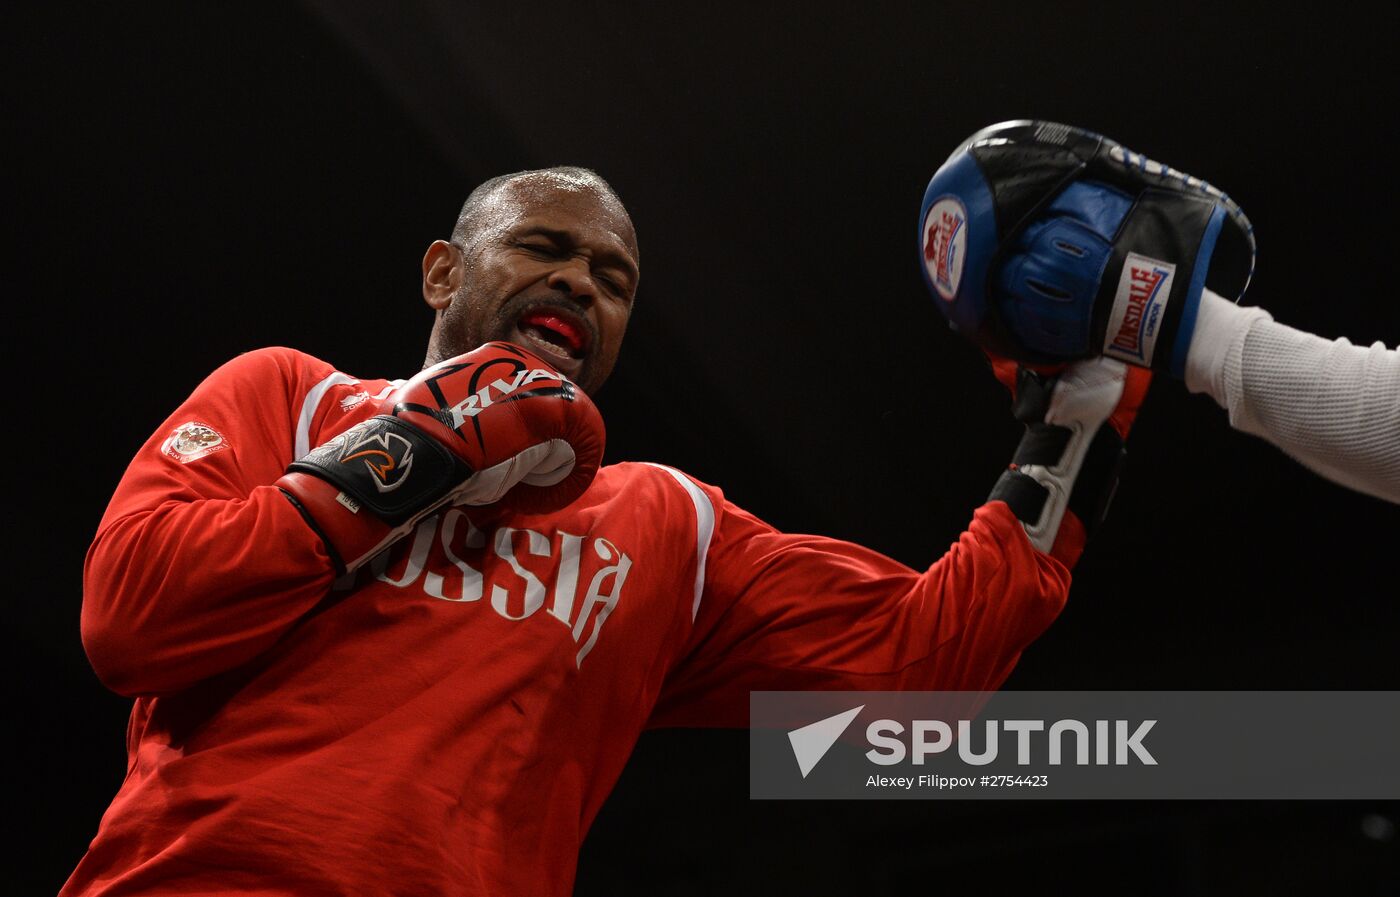 Boxing. Training by Enzo Maccarinelli and Roy Jones Jr.